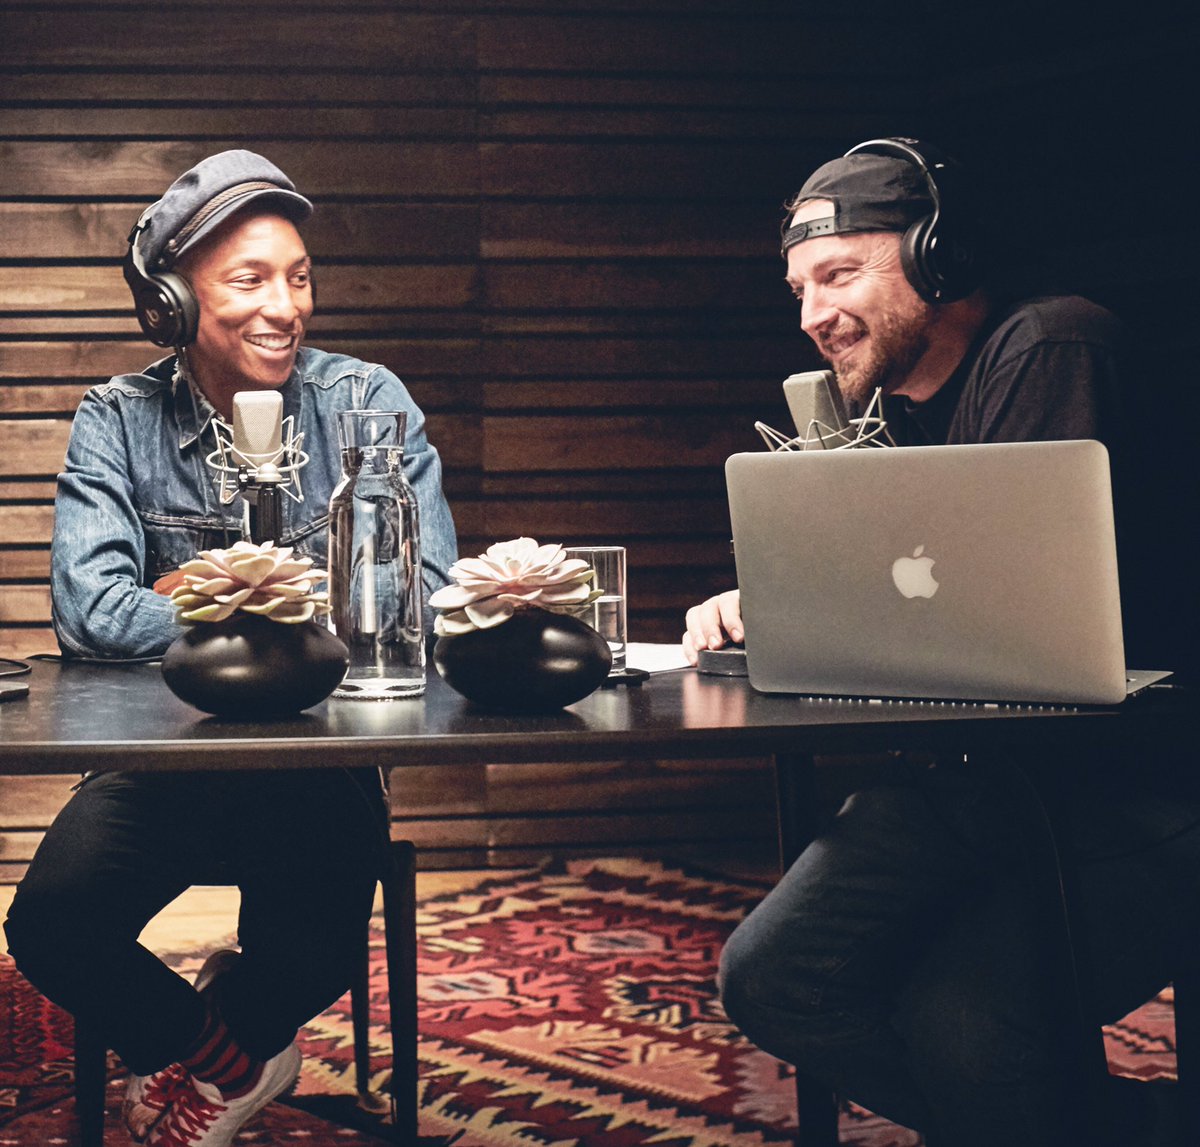 This Sunday! ‘Best Of’ #OTHERtone episode on @Beats1 Radio at 12PM LA/3PM NY/8PM UK. https://t.co/UbCMPCovP6